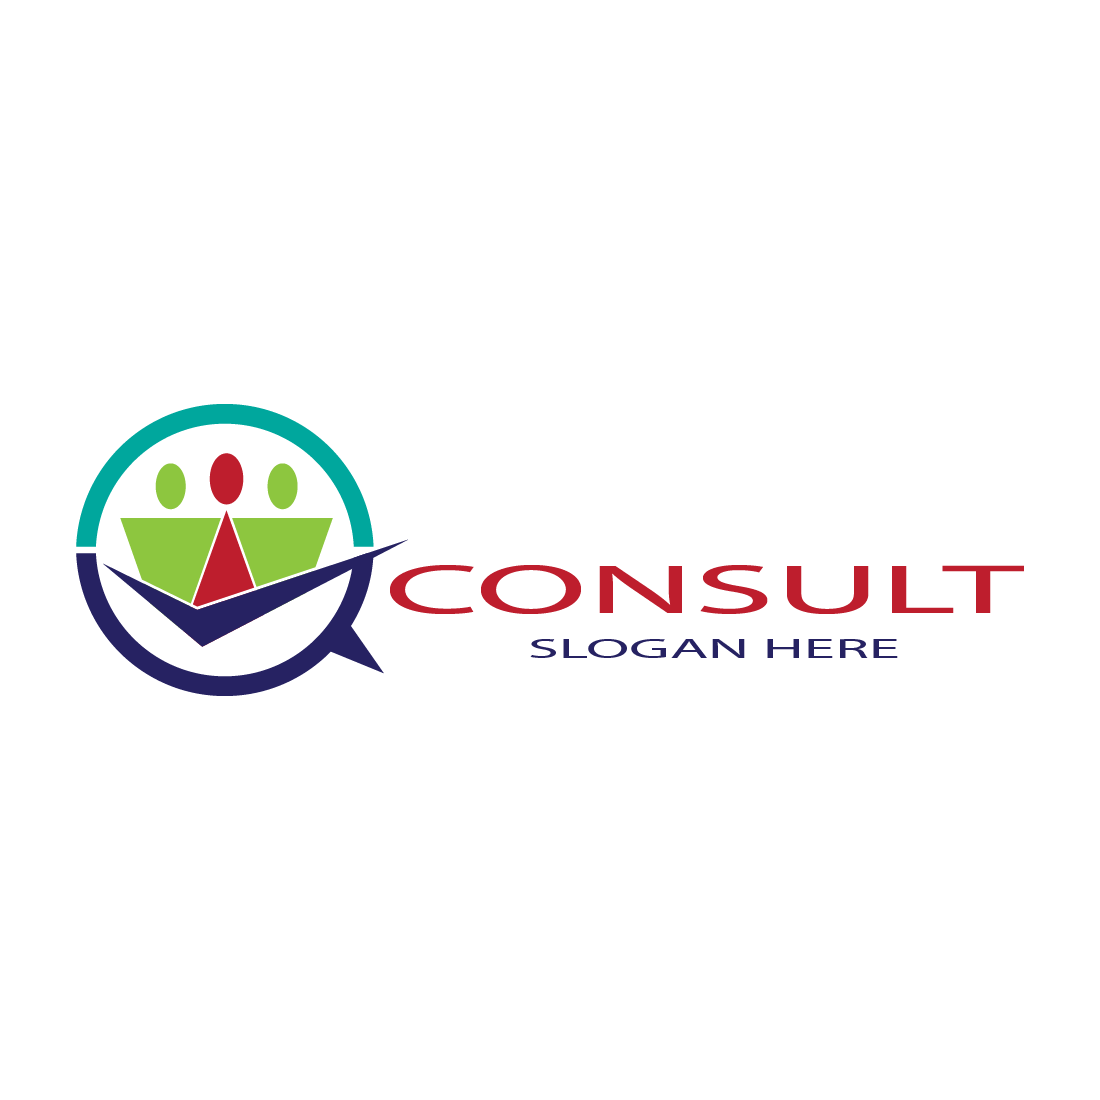 Consulting Logo created by SM Design.